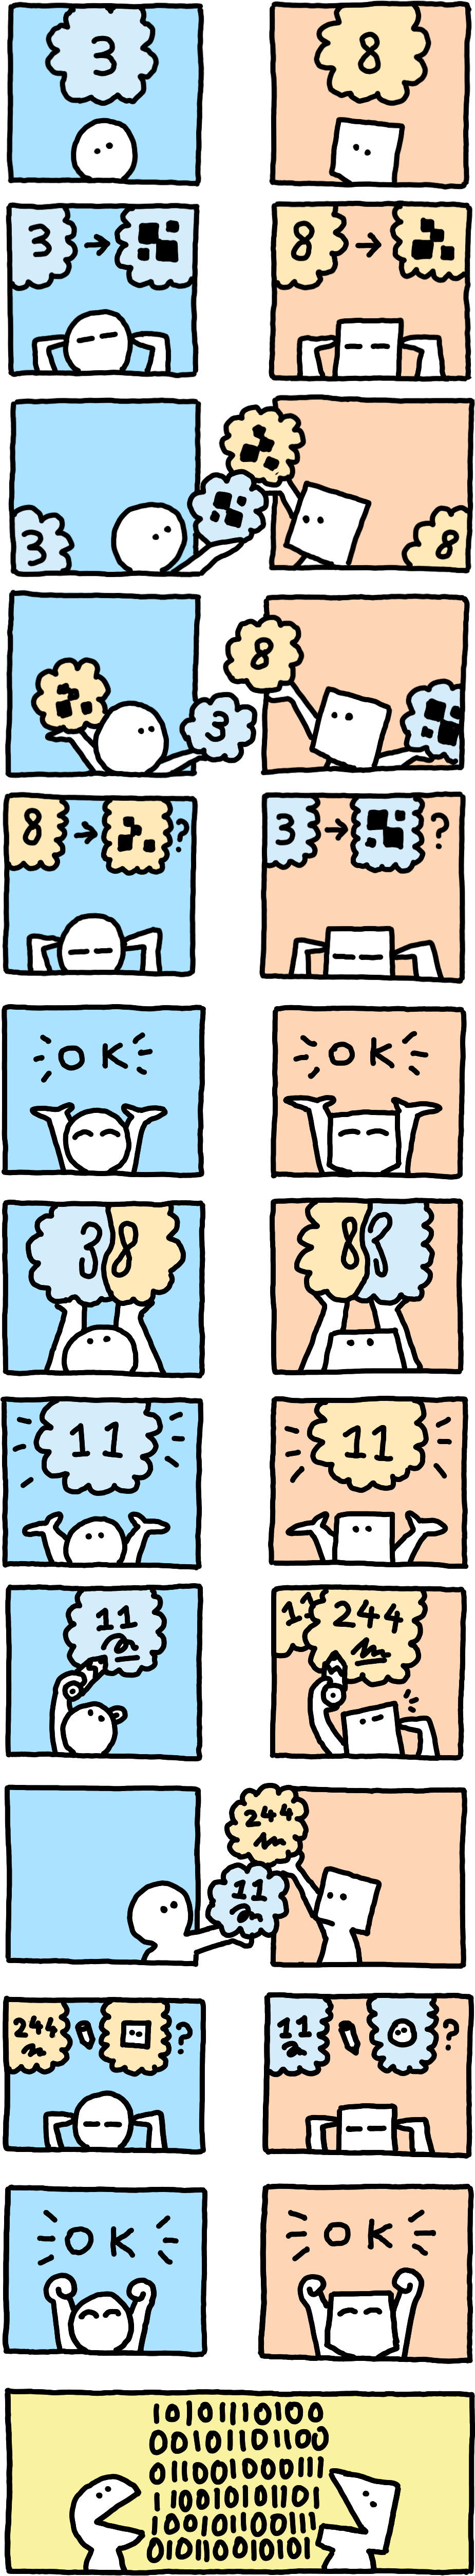 A comic visualising nonce generation with one column for each peer. The peers think of their numbers, hash them, exchange the hashes, then exchange their numbers, verify the hash of the received number, xor the numbers together, with one peer using the complement number instead. With the nonces generated, the peers then each sign their nonce, exchange the signatures, and verify the signature they received. After successful verification, they start vivaciously chattering in binary.